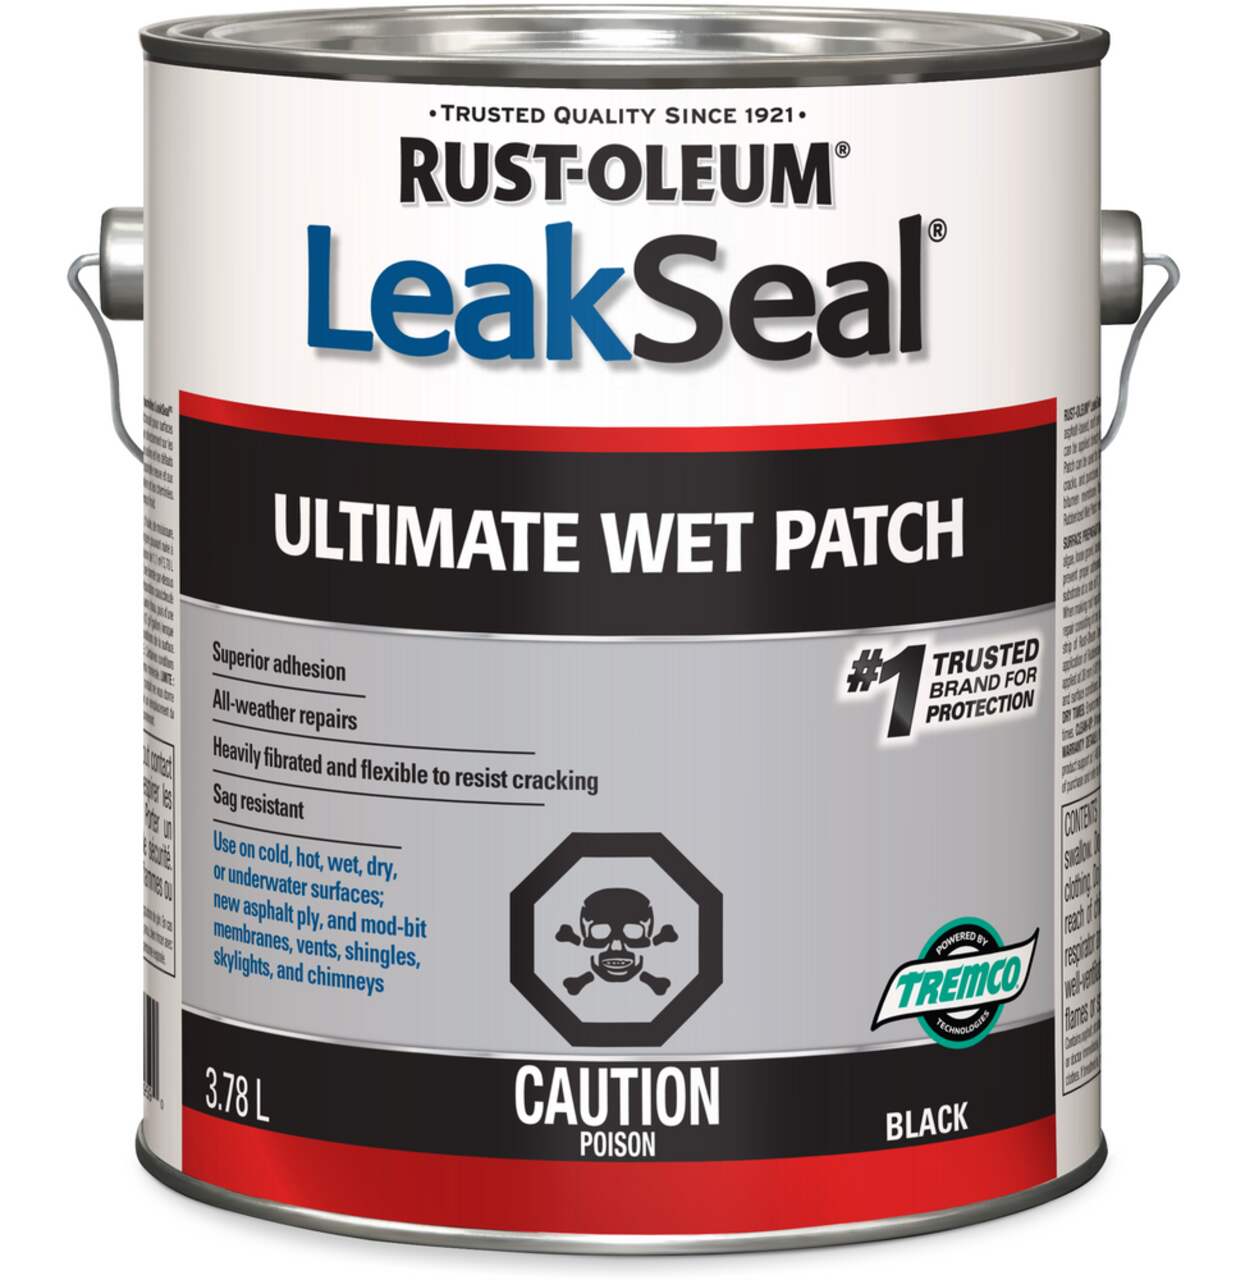 https://media-www.canadiantire.ca/product/fixing/paint/surface-prep-maintenance/0641568/ultimate-wet-patch-3-78-l-667f2513-2efc-4eda-b92a-45b622bbc6c9.png?imdensity=1&imwidth=640&impolicy=mZoom